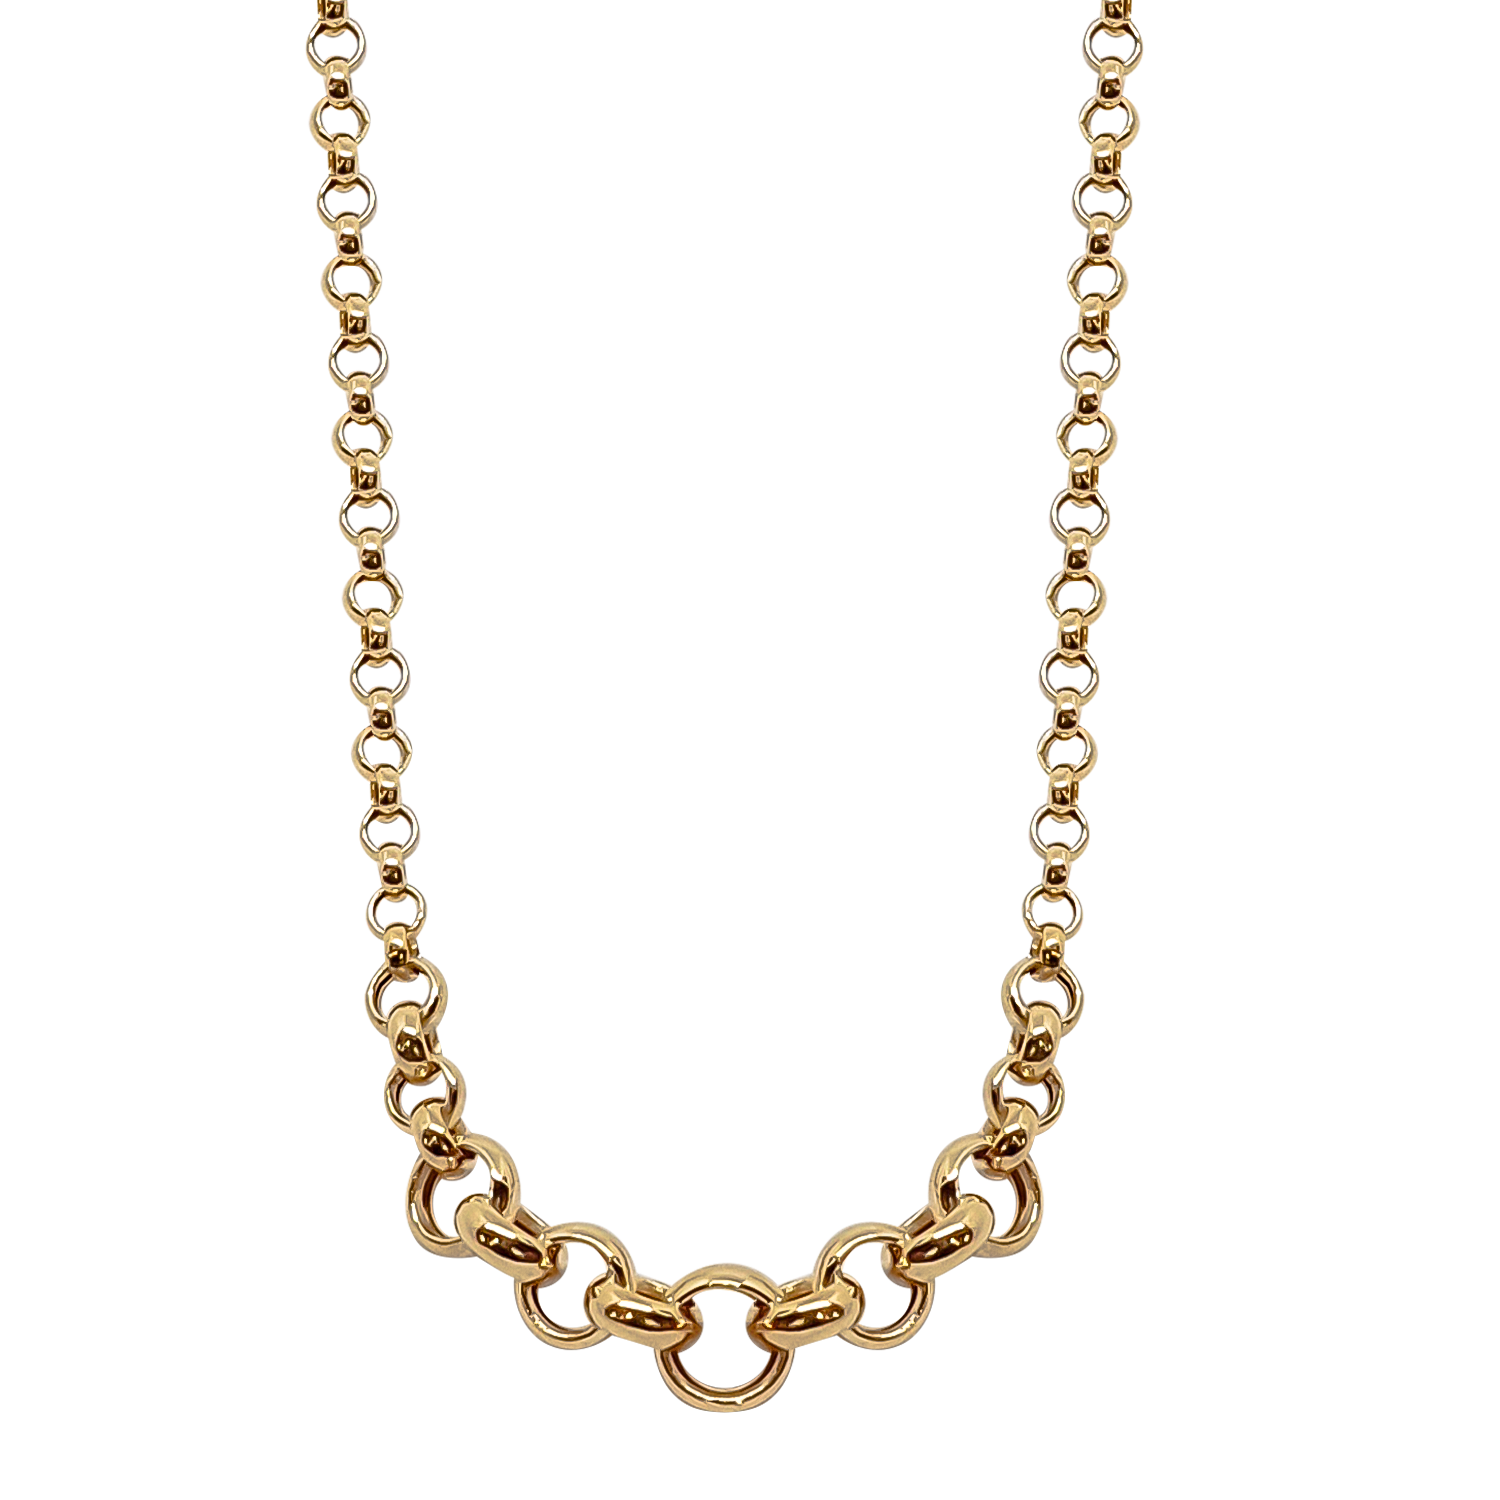 Graduated Belcher Link Chain in 9ct Yellow Gold in hollow tubes for a lighter weight on your shoulders.